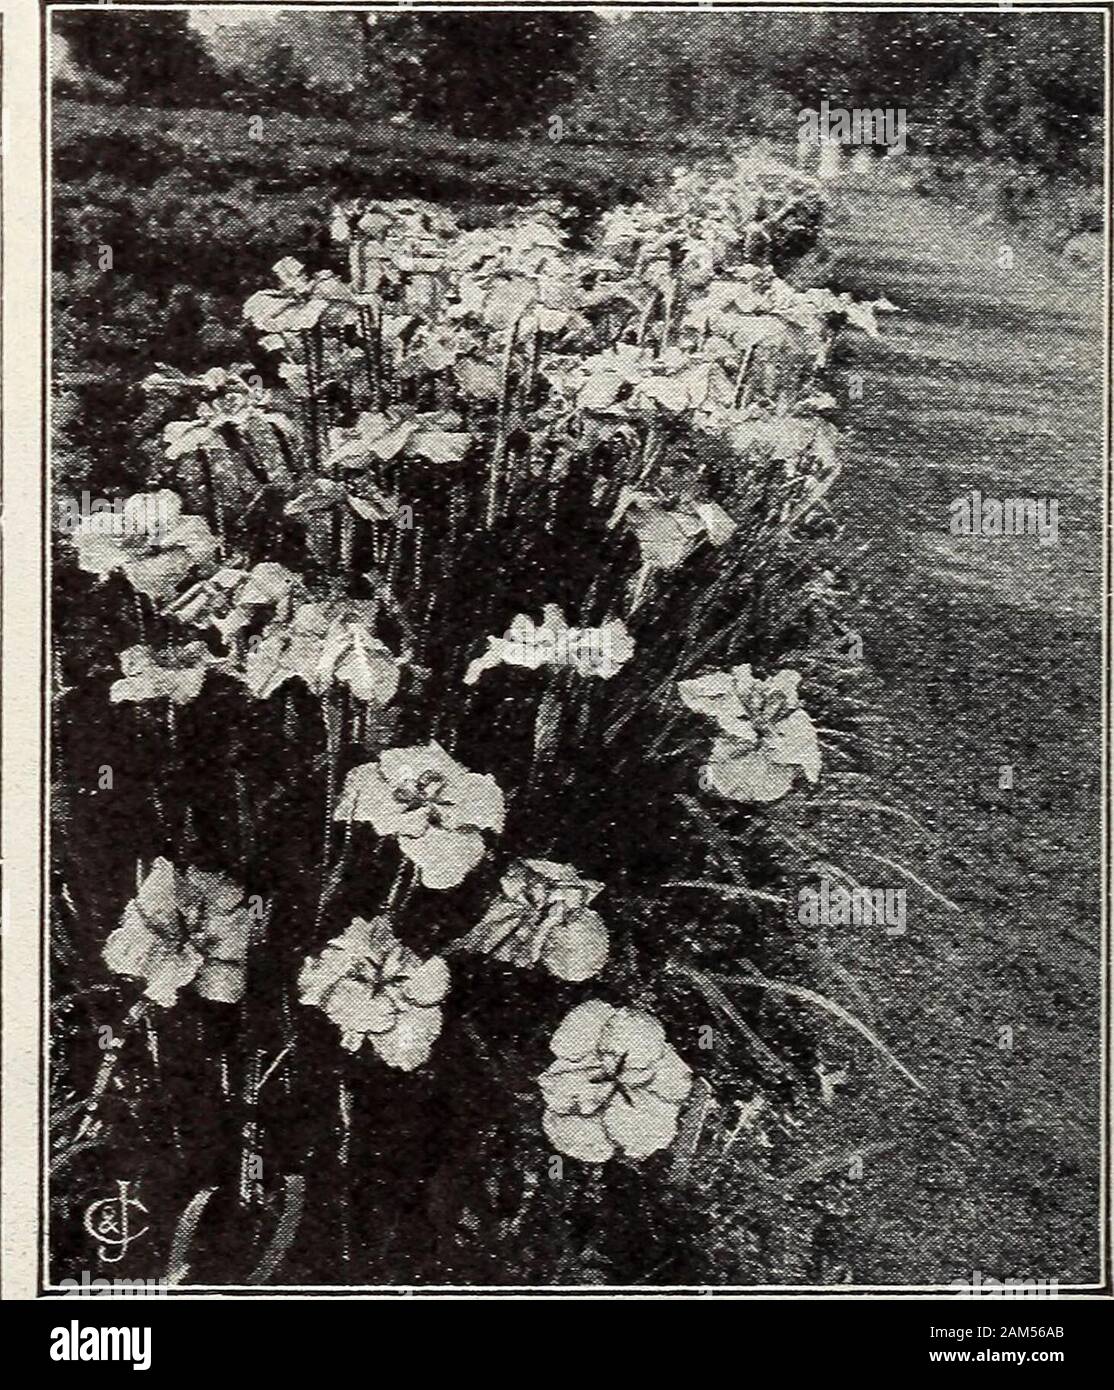 New floral guide : autumn 1913 . s (Bleeding Heart). Blooms early; beautiful rosy pink and white flowers.Funkia undulata variegata. Lily-like flowers and long narrow leaves, fluted and edged with white. 20c. each.Helianthus, Soleil dOr, or Sun of Gold. Grows 4 feet- quilled petals like a dahlia; golden yellow.Helleborus niger, or Christmas Rose. Pure white, waxy flowers. Ready in December. 25 cts. each.Hemerocallis (Golden Double-Crown Lily). Large, lily-like flowers, golden yellow with carmine marking.Hollyhocks, Single. Red, white and yellow.Lychnis, Single. Vermilion-scarlet flowers.Ornamen Stock Photo